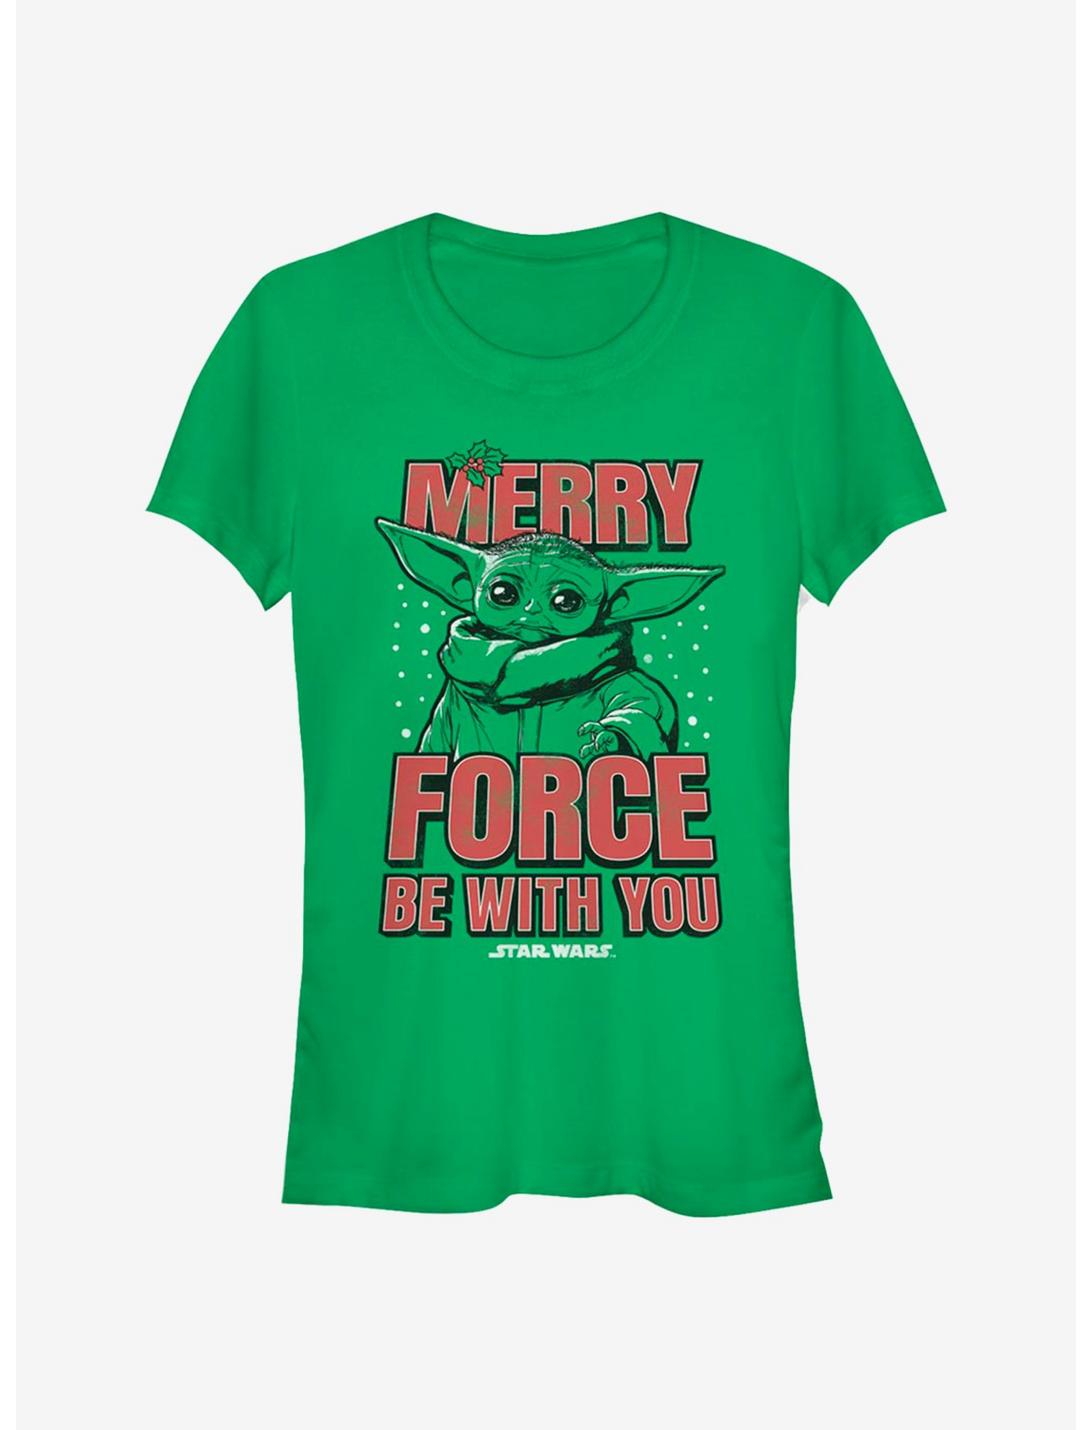 Star Wars The Mandalorian The Child Merry Force Girls T-Shirt, KELLY, hi-res